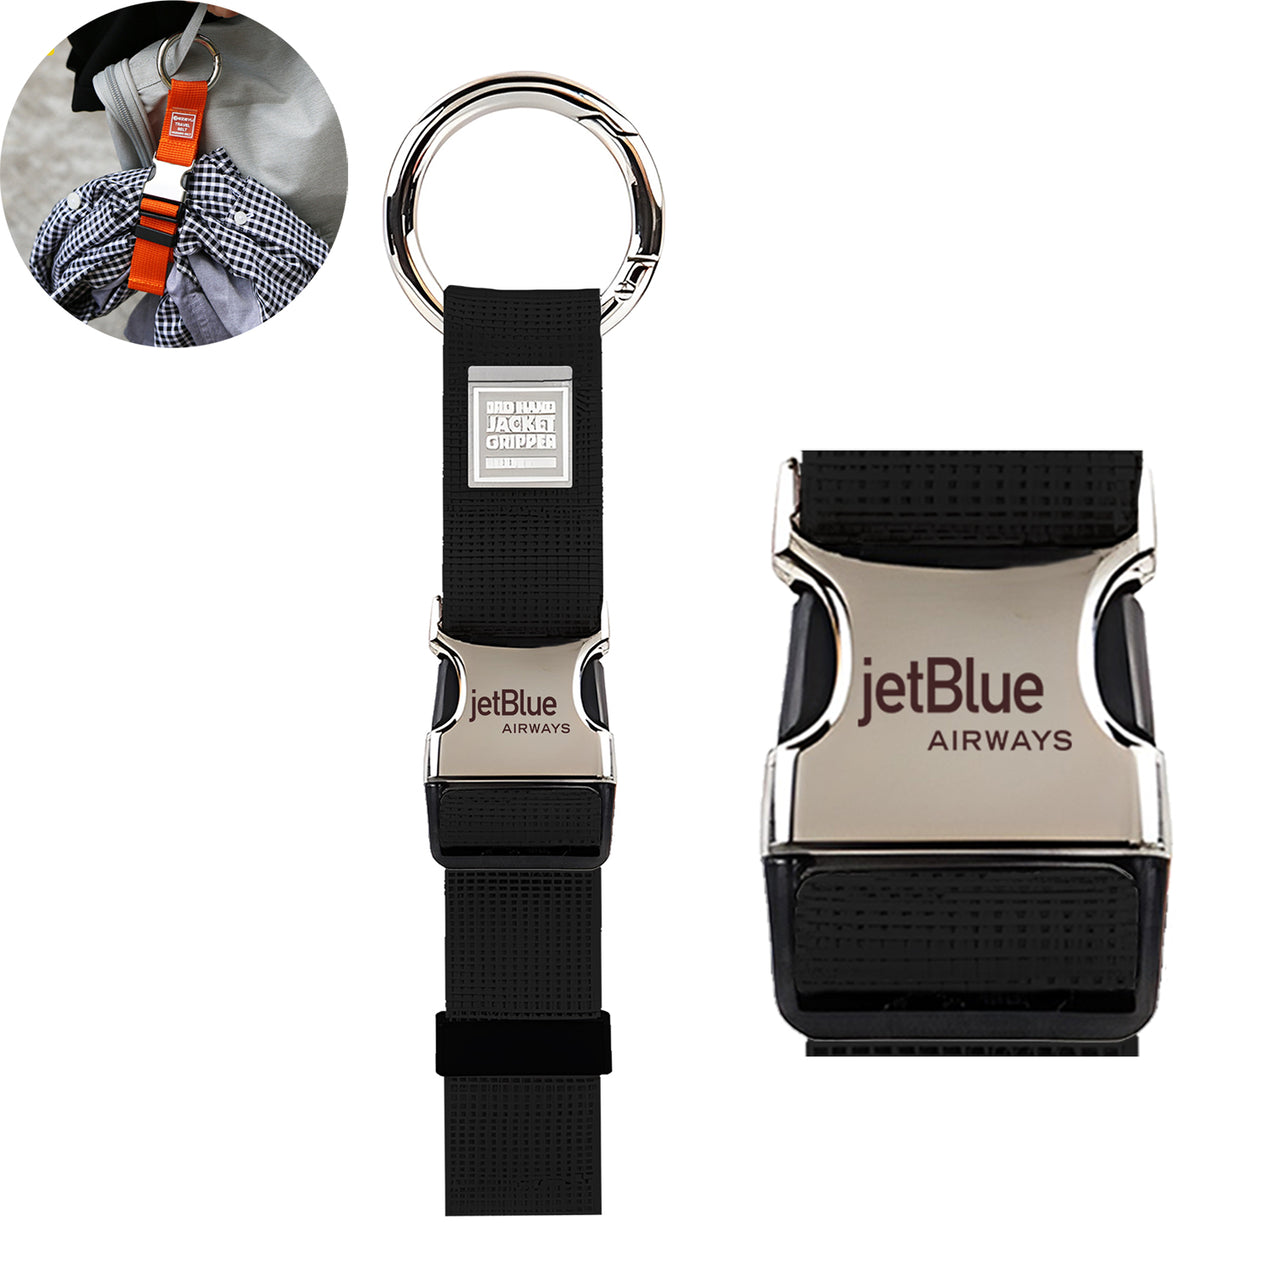 jetBlue Airways Airlines Designed Portable Luggage Strap Jacket Gripper